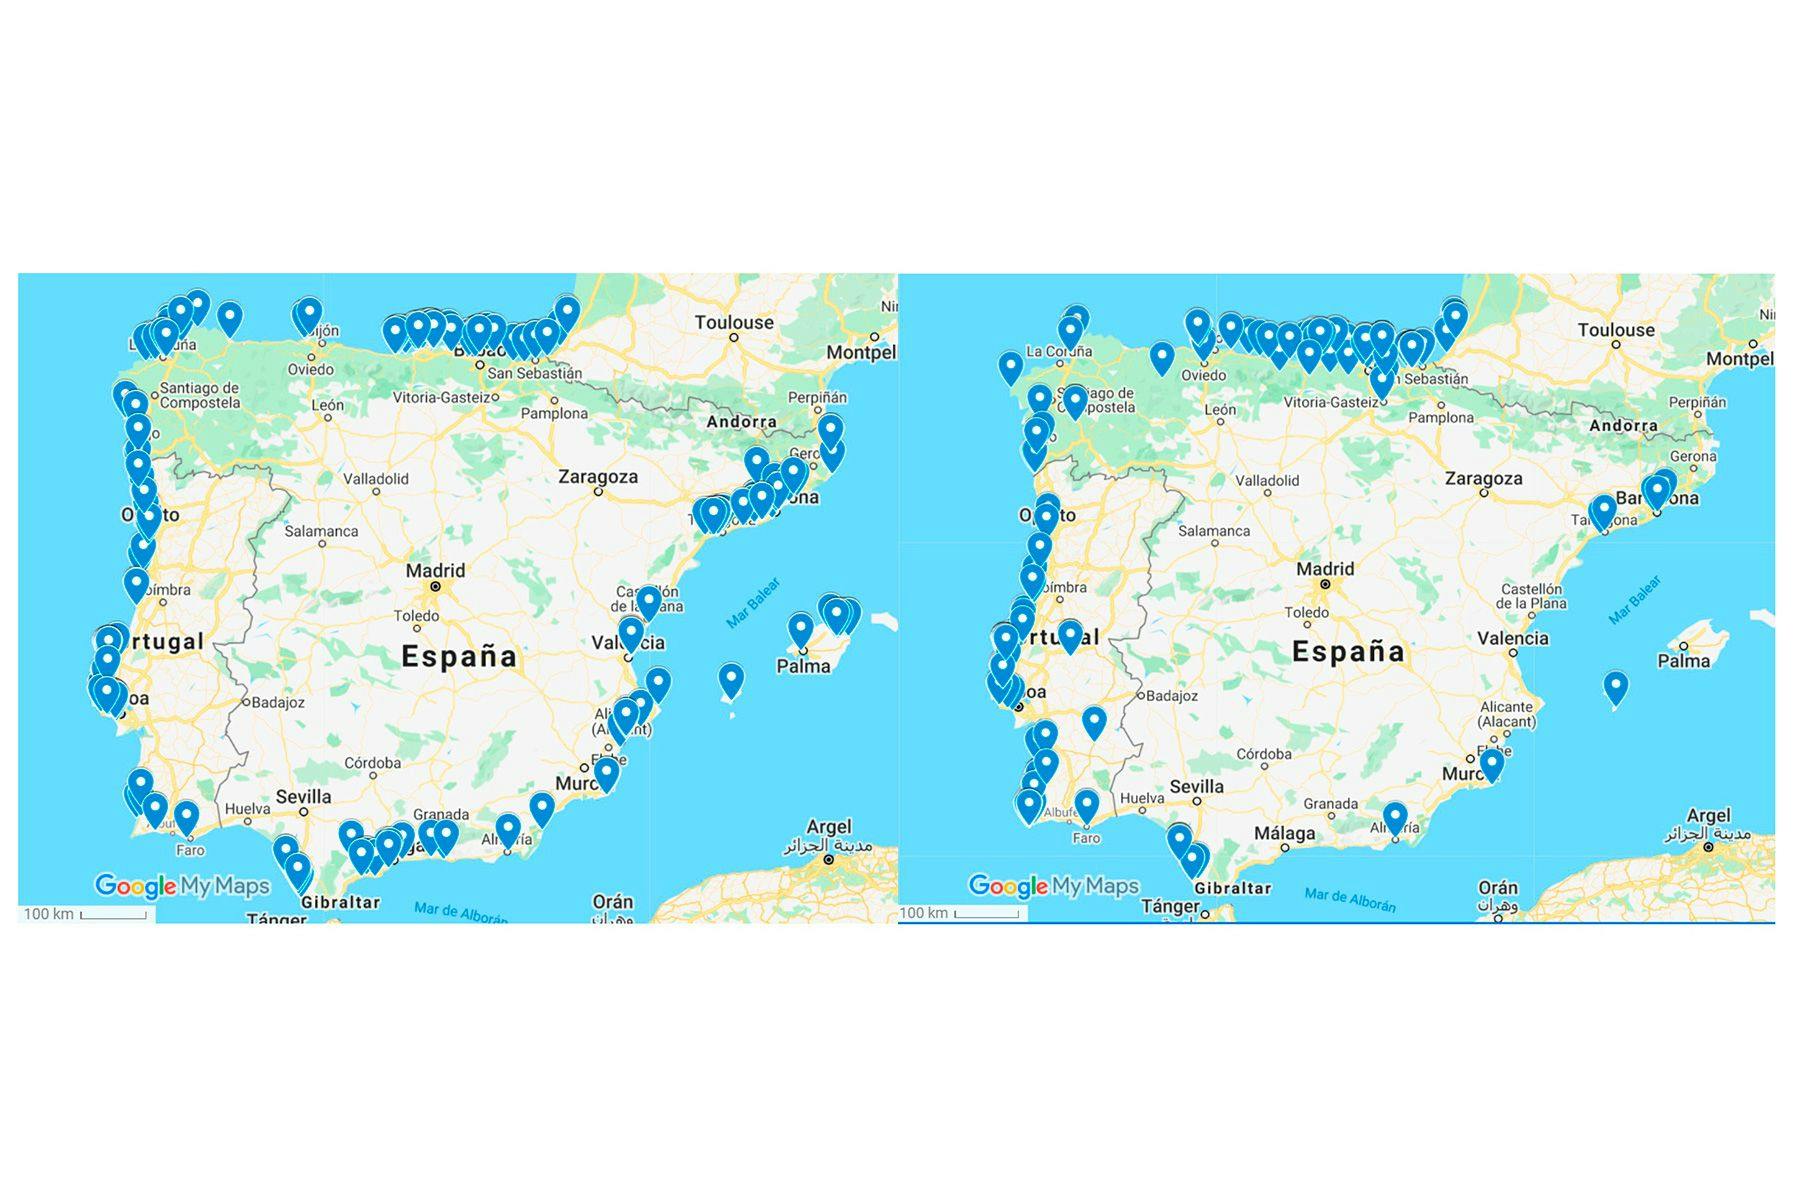 Maps showing the distribution of locally used surf spots (left) and surf spots that are more popular with visiting surfers (right)